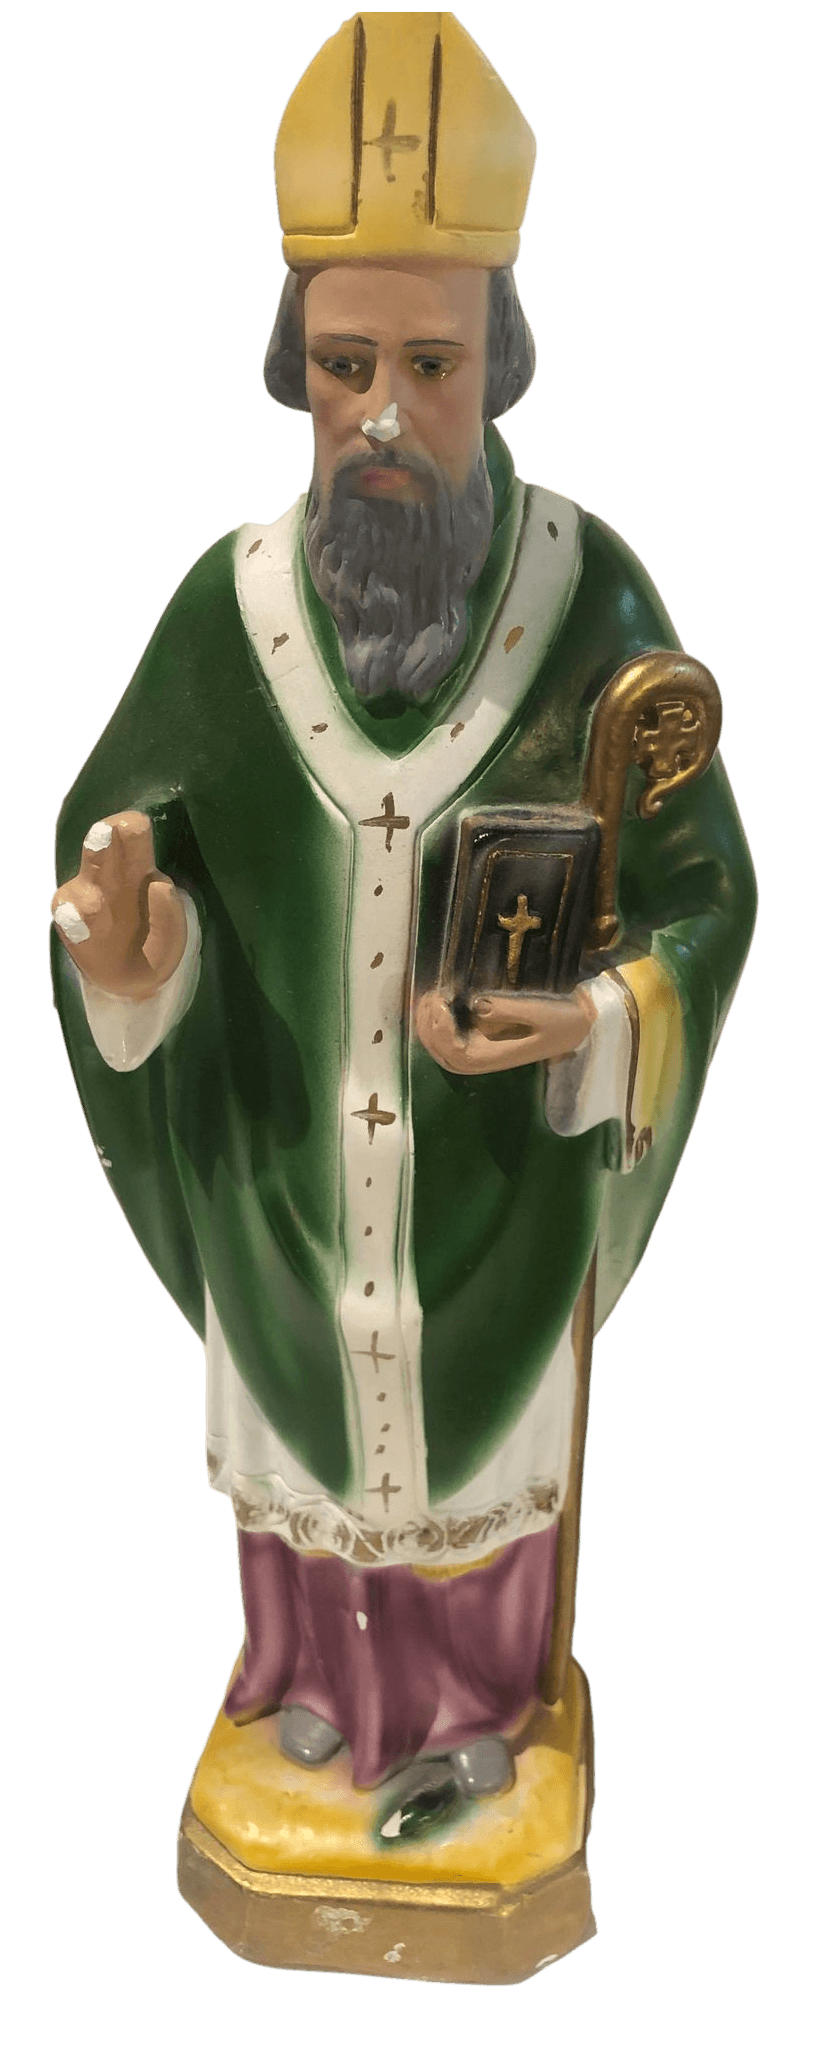 Statue Saint Patrick Chalkware Hand-Painted. 12” tall - Ysleta Mission Gift Shop- VOTED El Paso's Best Gift Shop